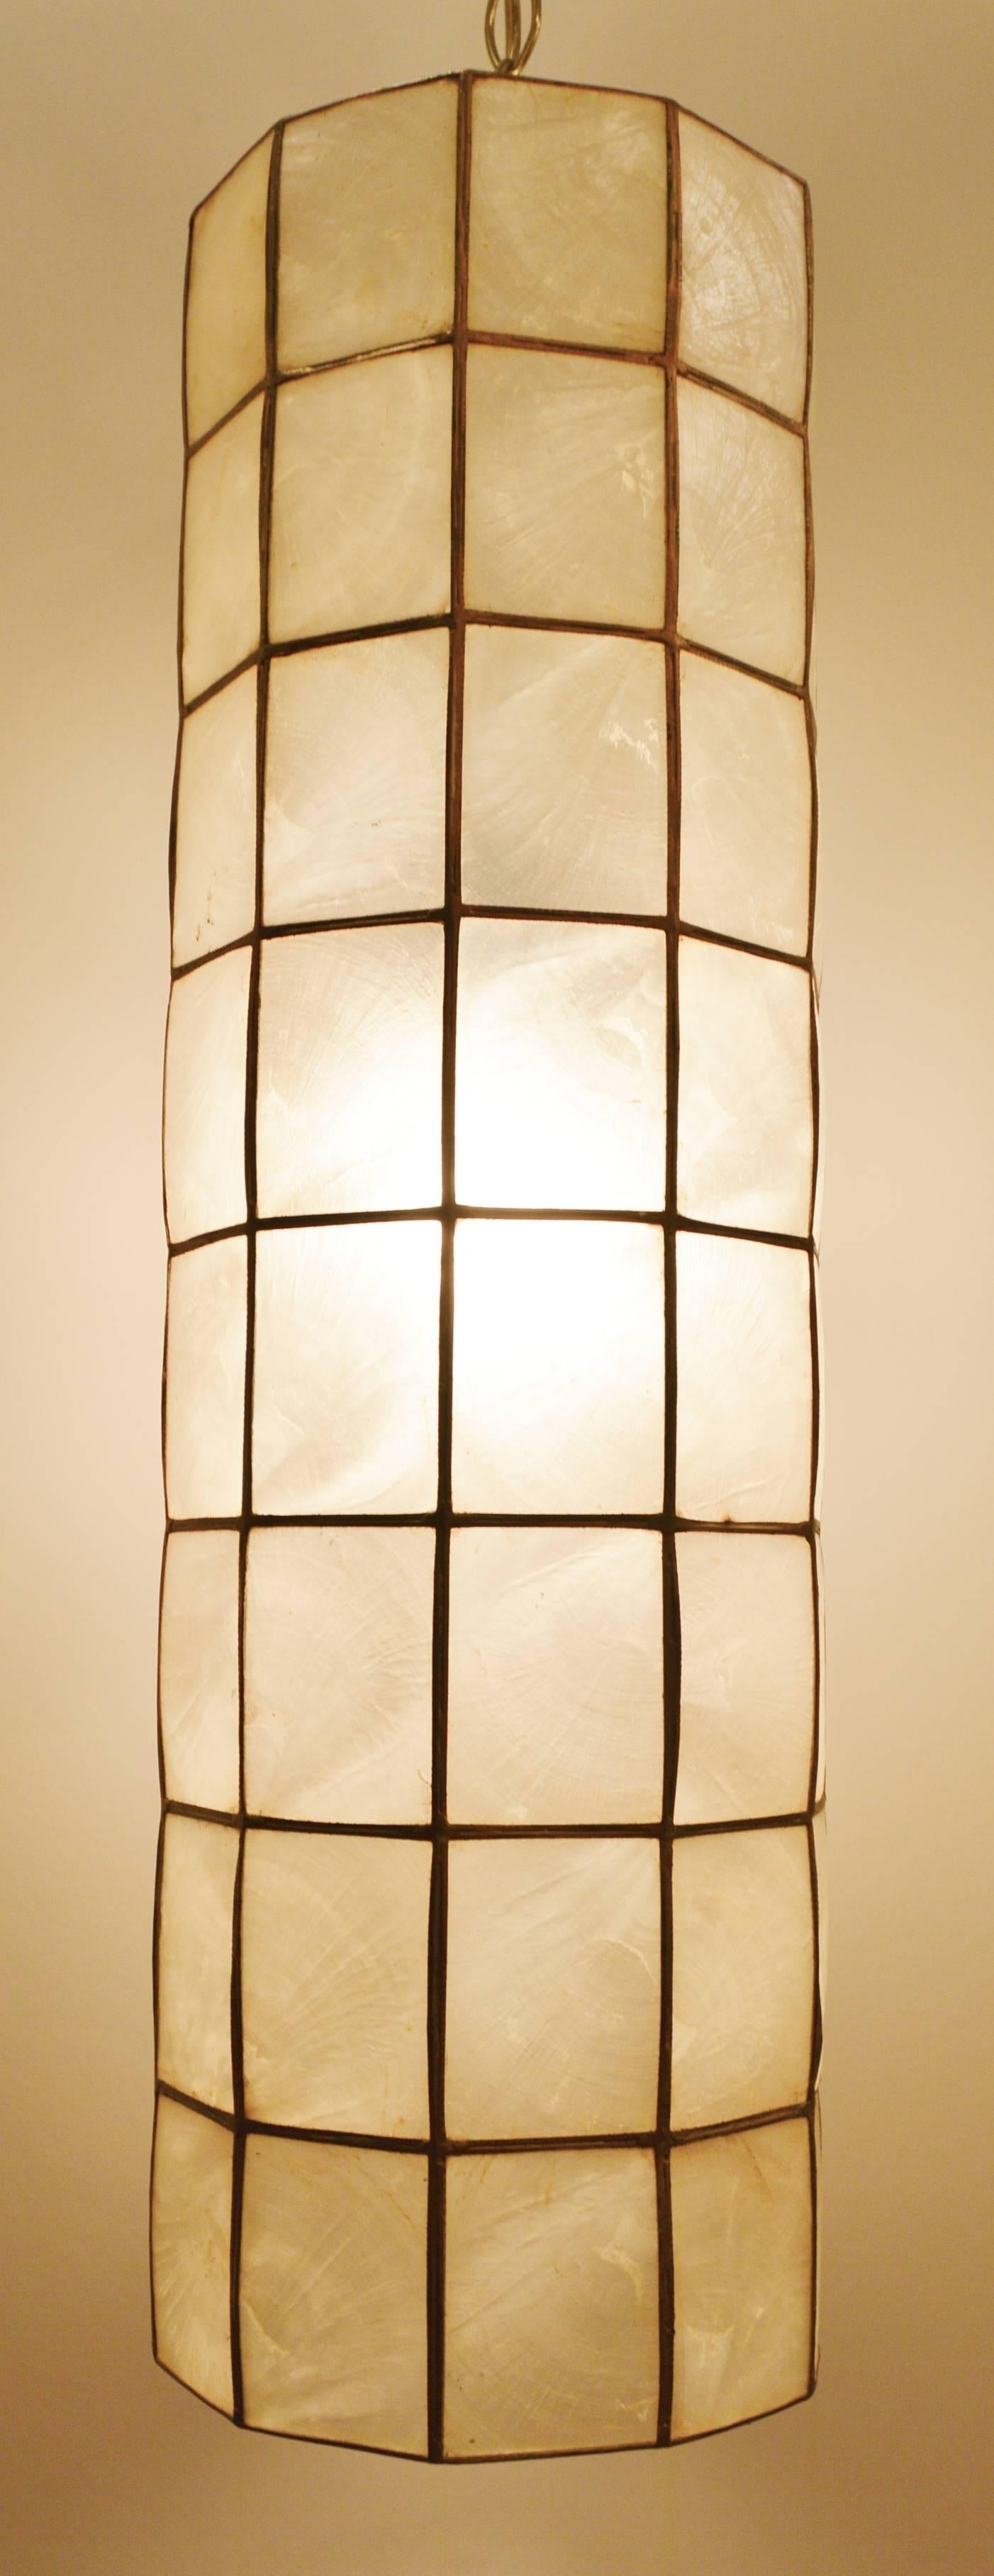 Large Capiz Shell Cylinder Pendant Light In Excellent Condition For Sale In New Westminster, British Columbia